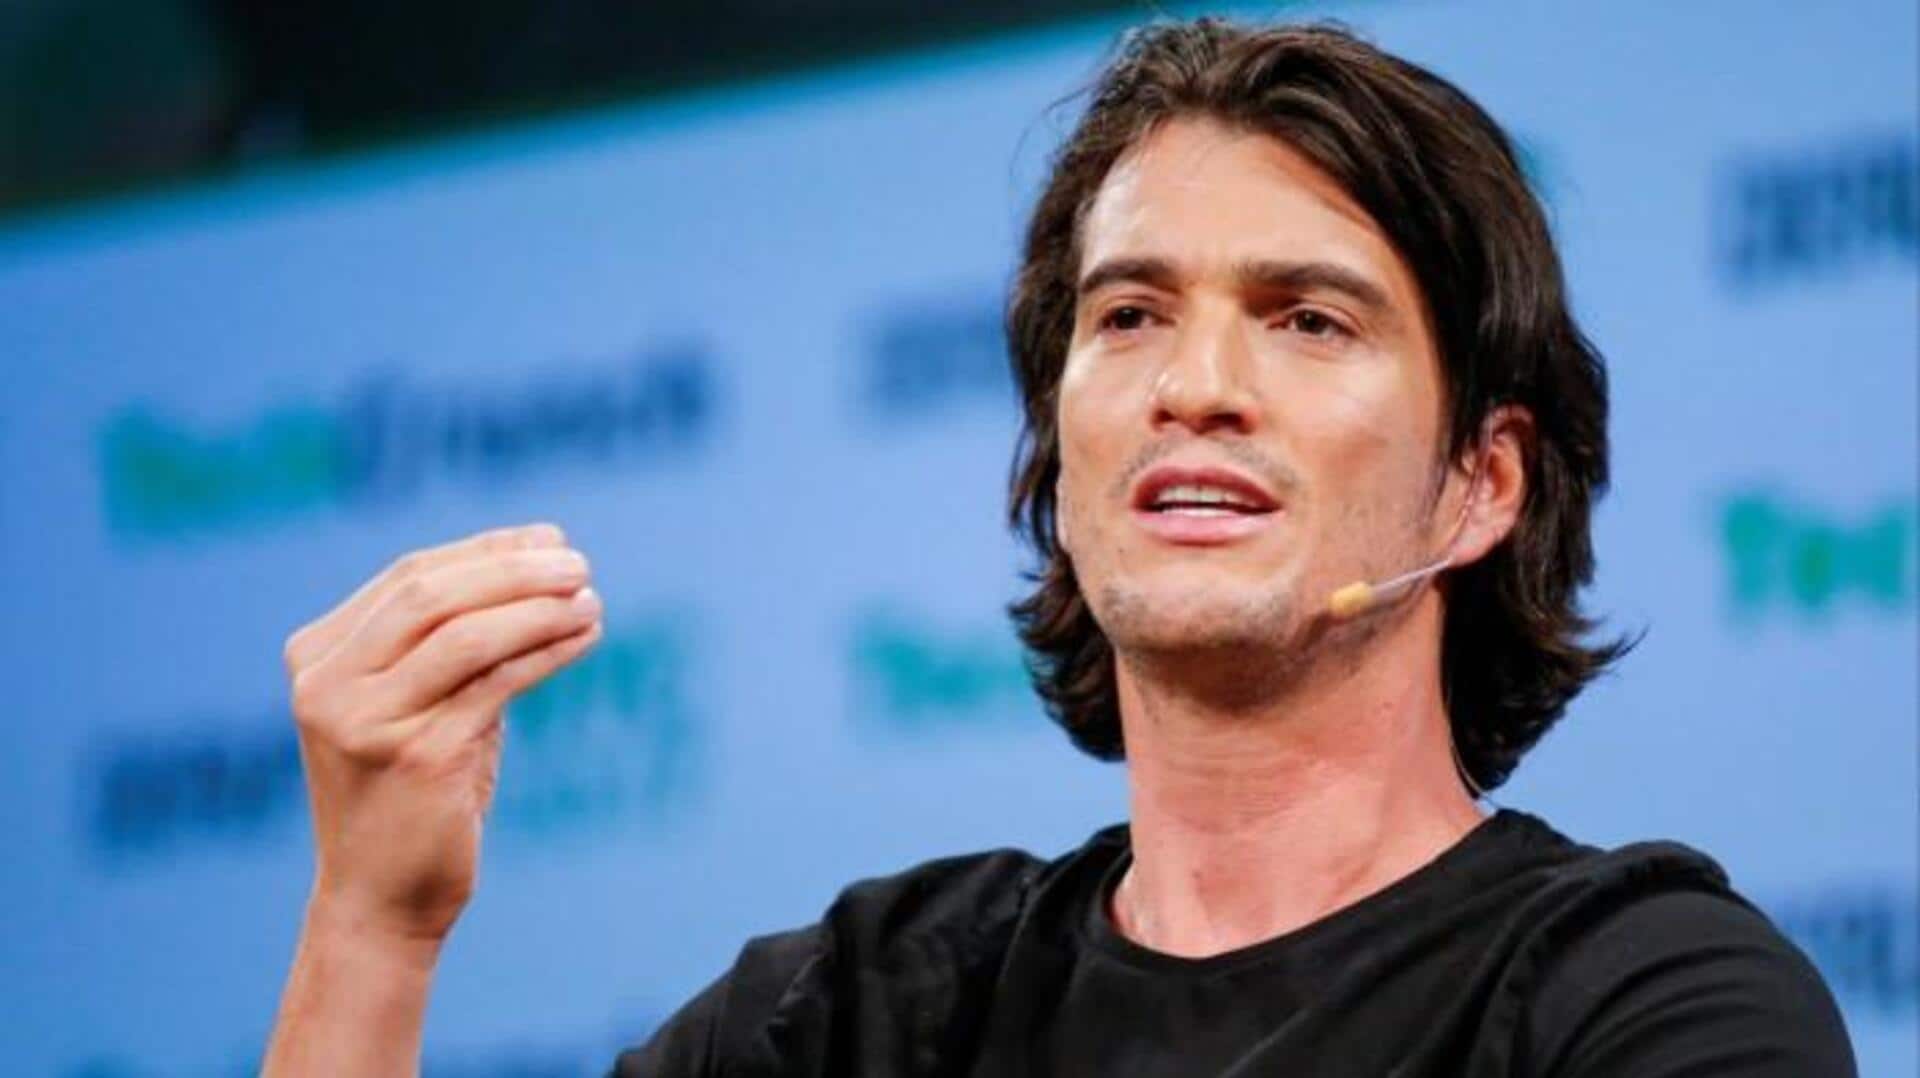 Adam Neumann proposes to reacquire bankrupt WeWork for hefty sum